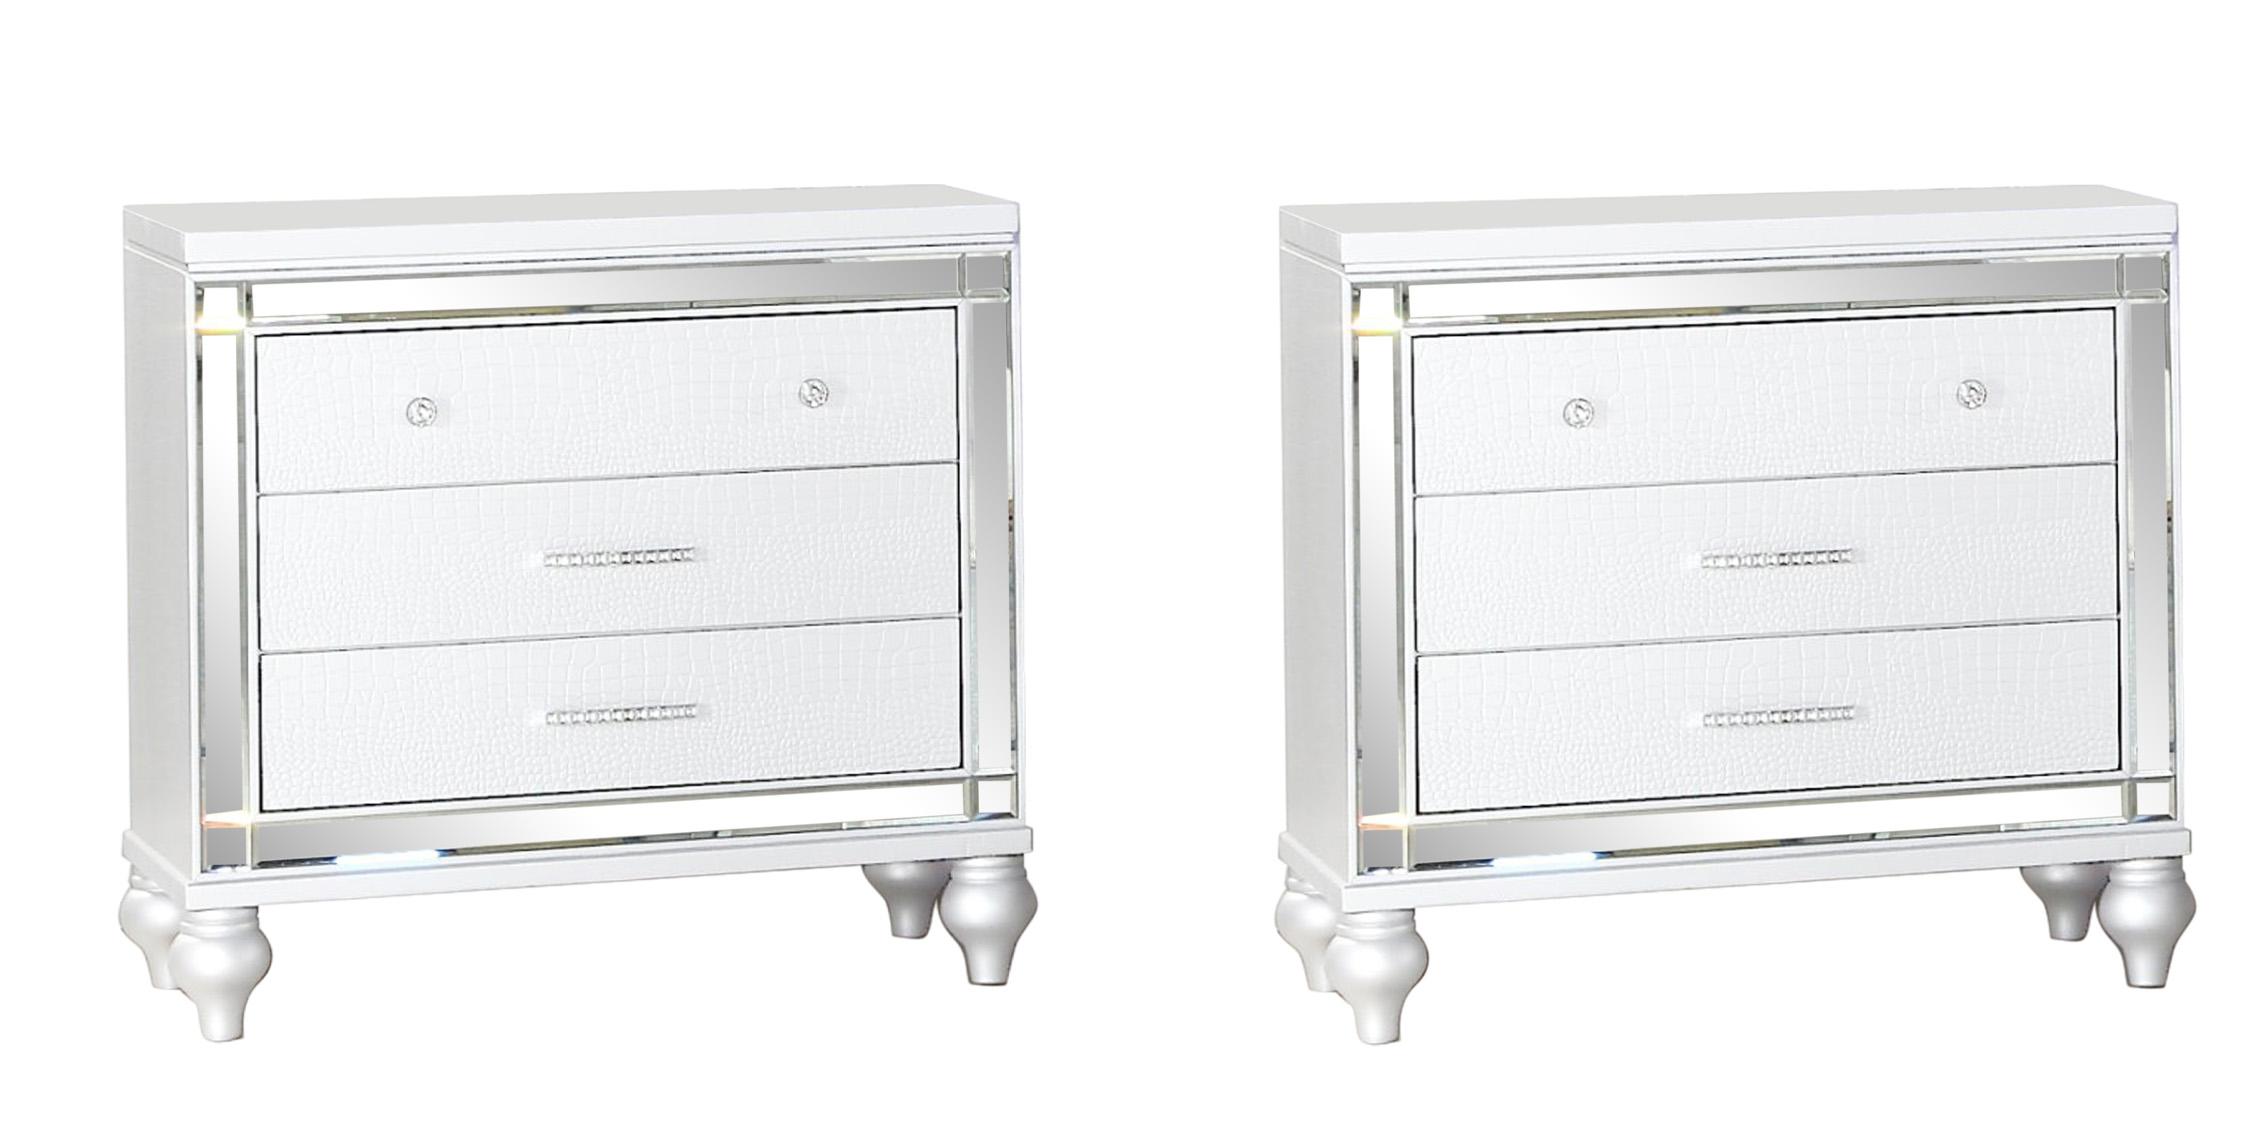 Contemporary, Modern Nightstand Set STERLING White STERLING-White-N-2PC in White 